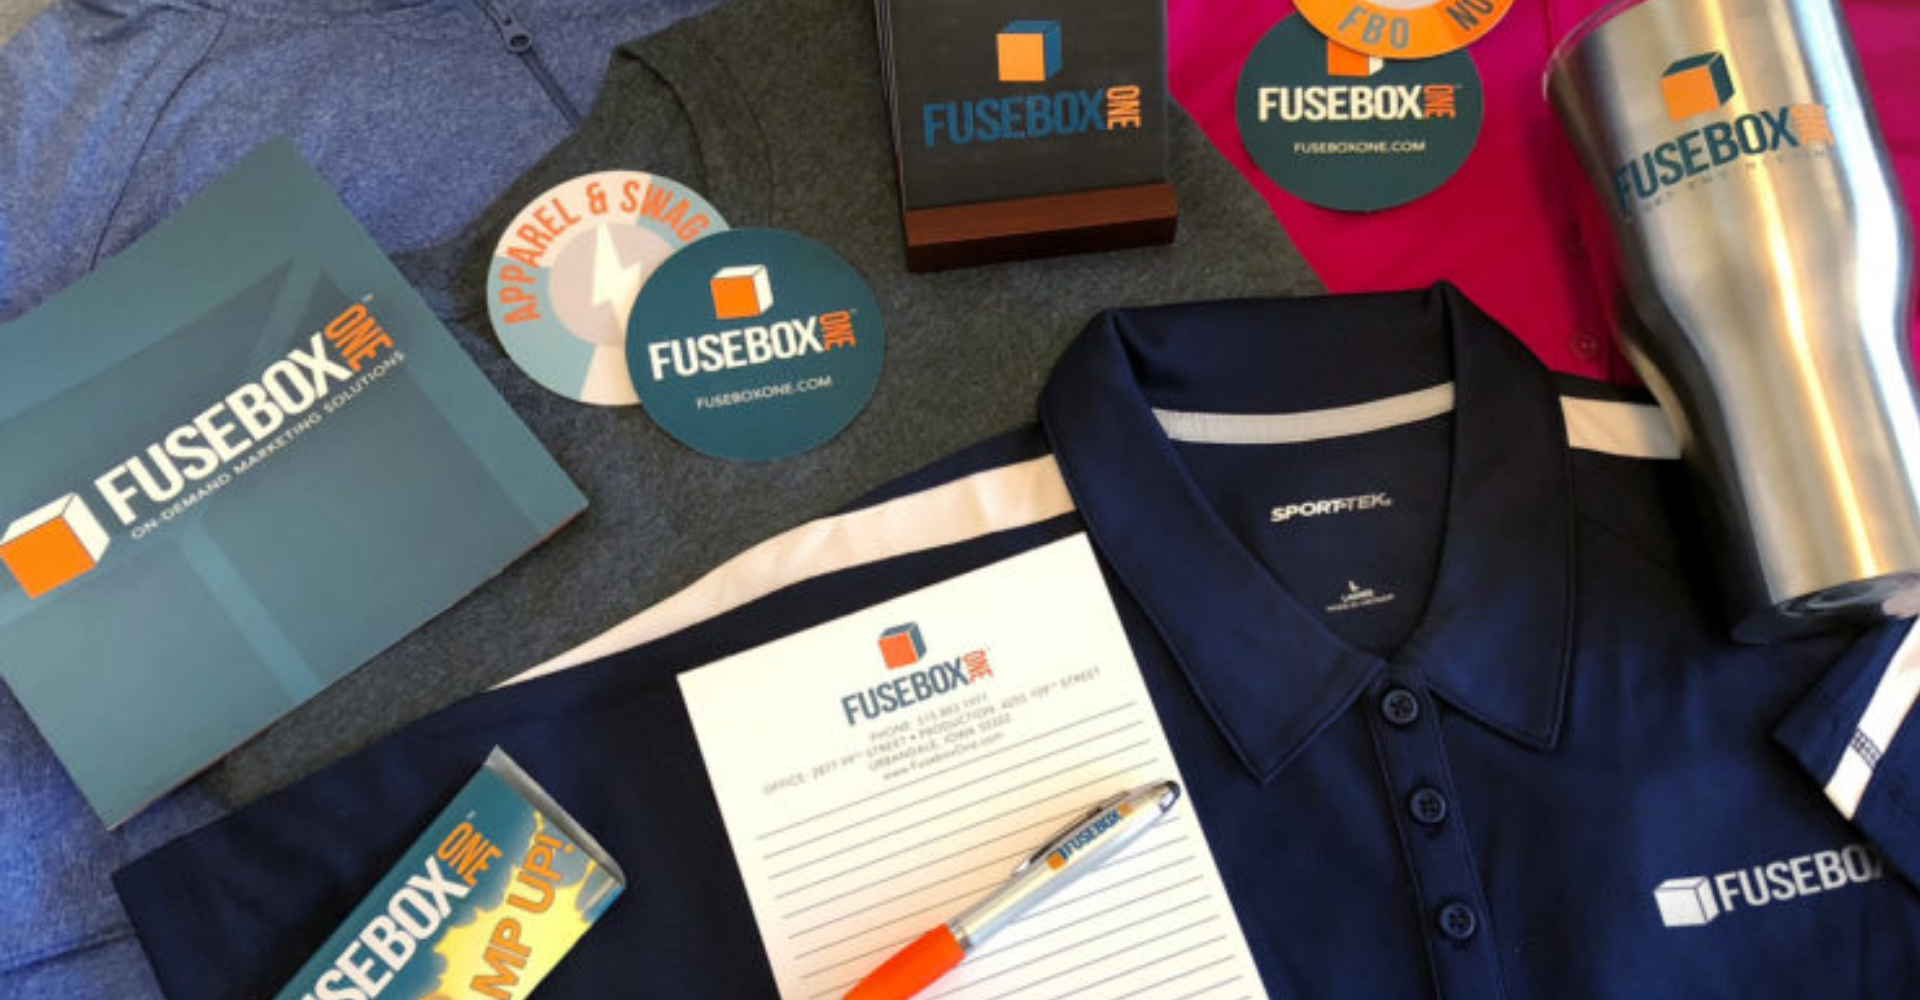 FuseBox One Polo, Pen, and Coasters on a table.